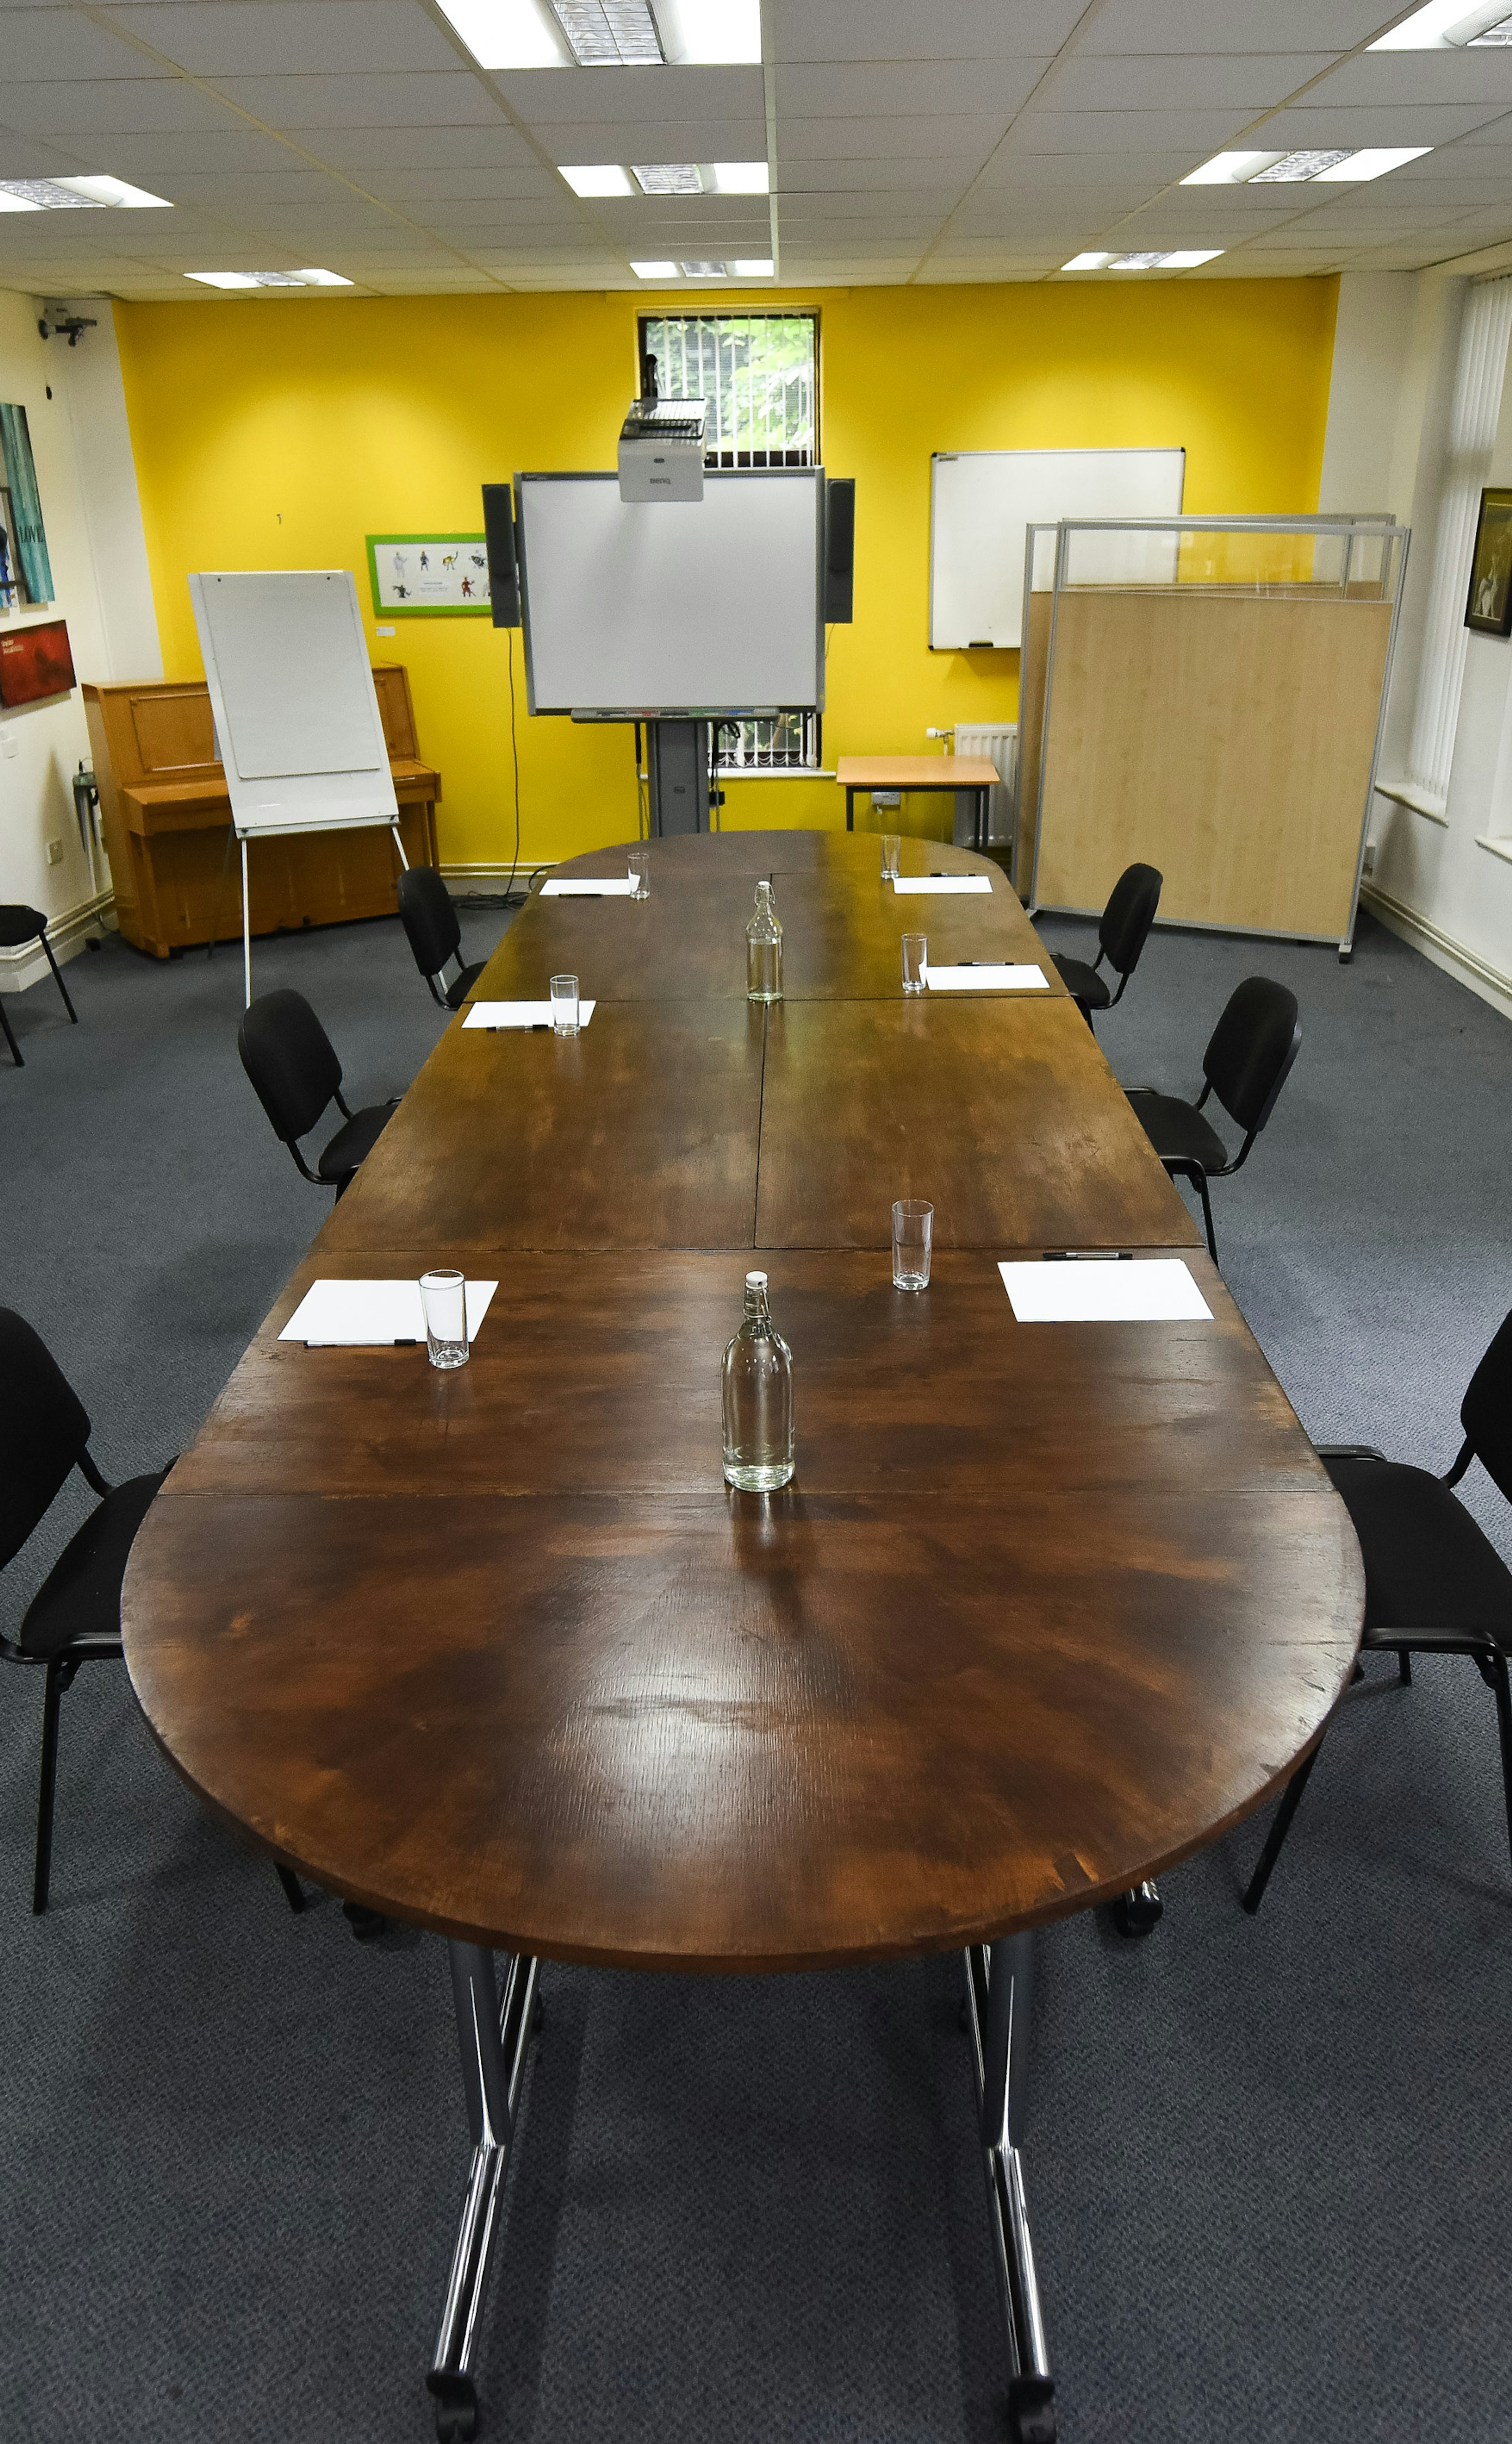 Meeting Rooms - The Brain Charity